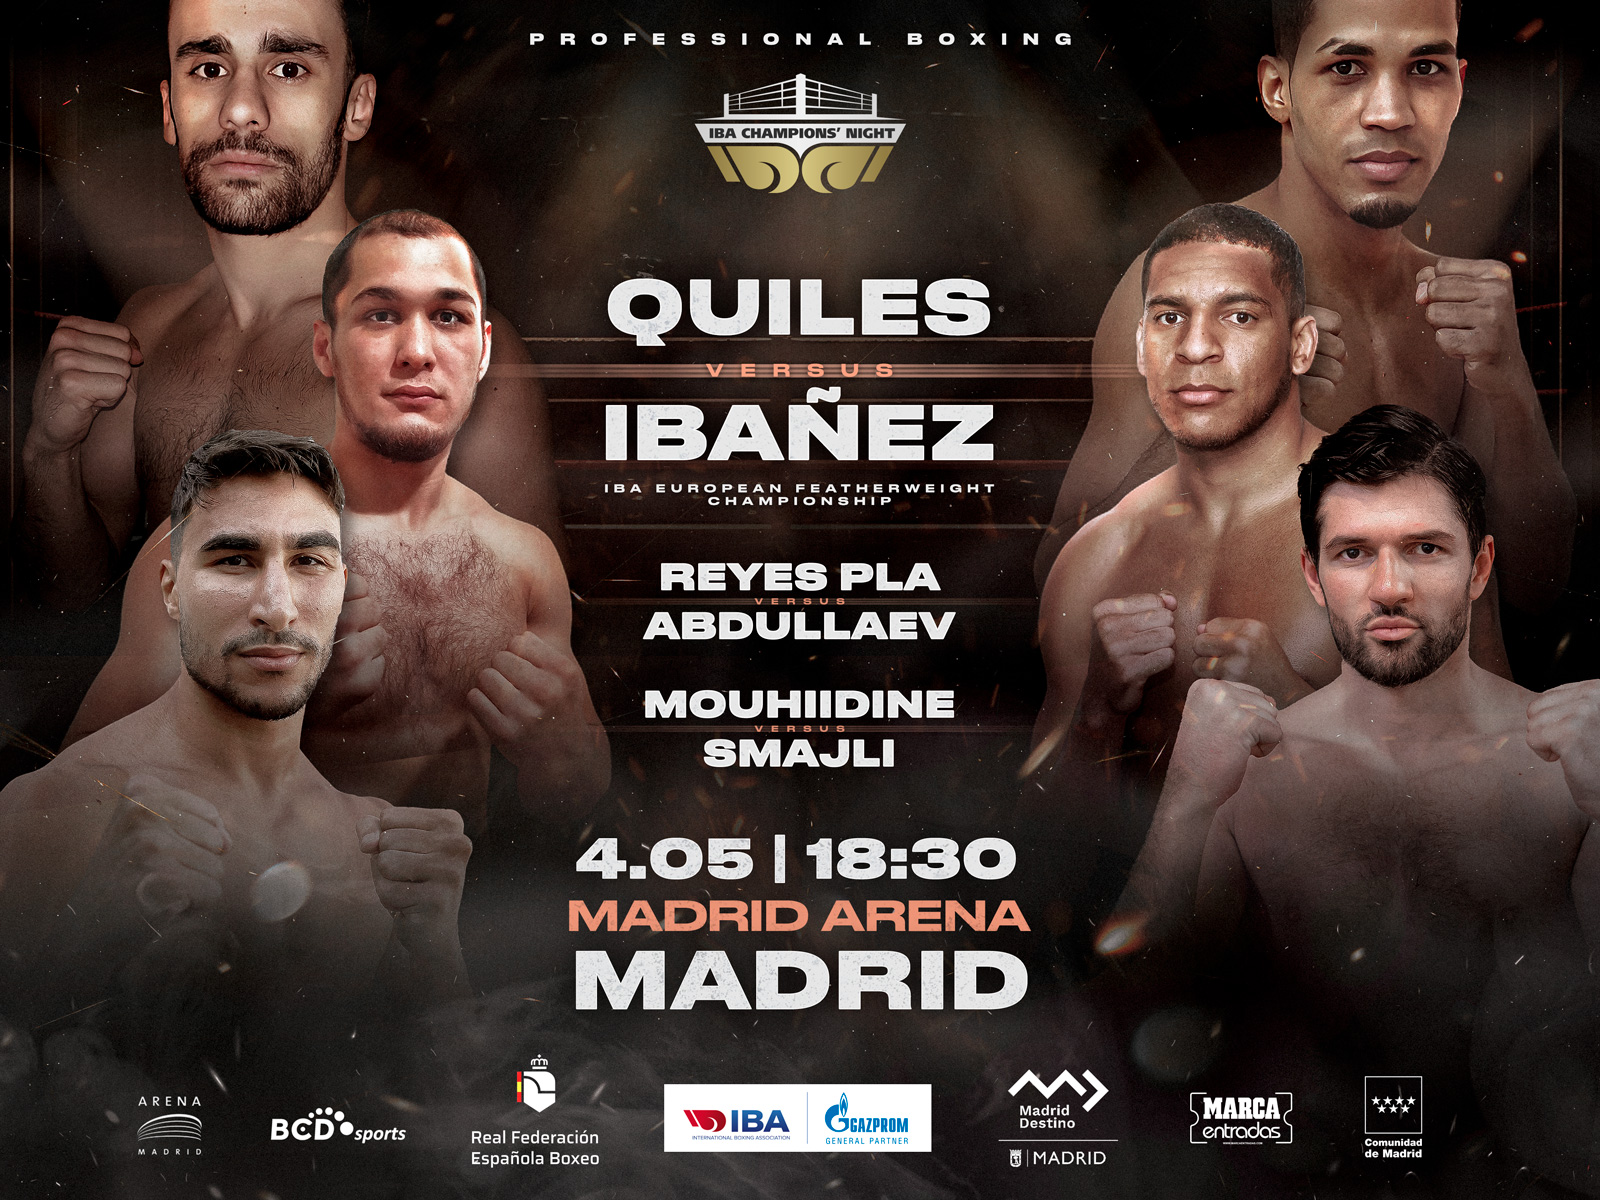 Madrid to host IBA Champions’ Night on 4 May with strong line-up of boxers from Spain and beyond